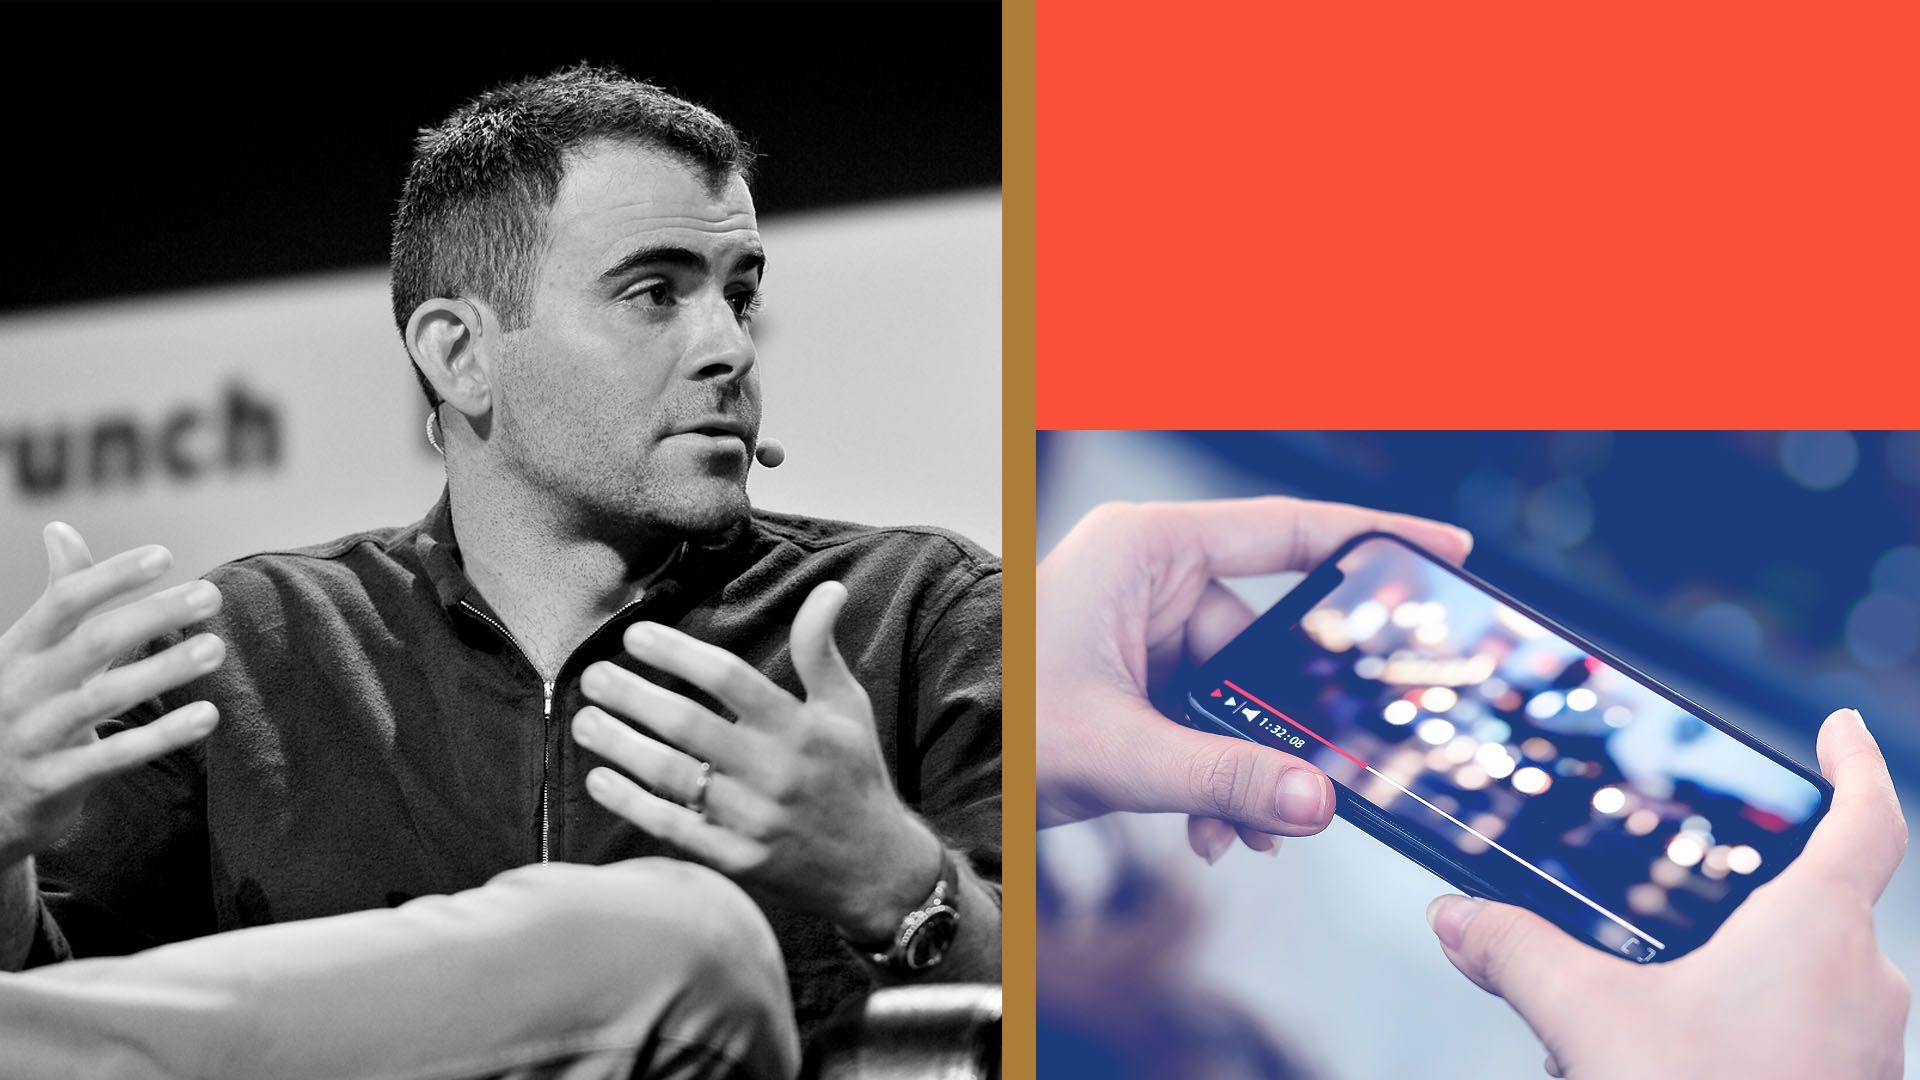 Photo illustration of Adam Mosseri, the Head of Instagram, and a person watching a video on their cellphone